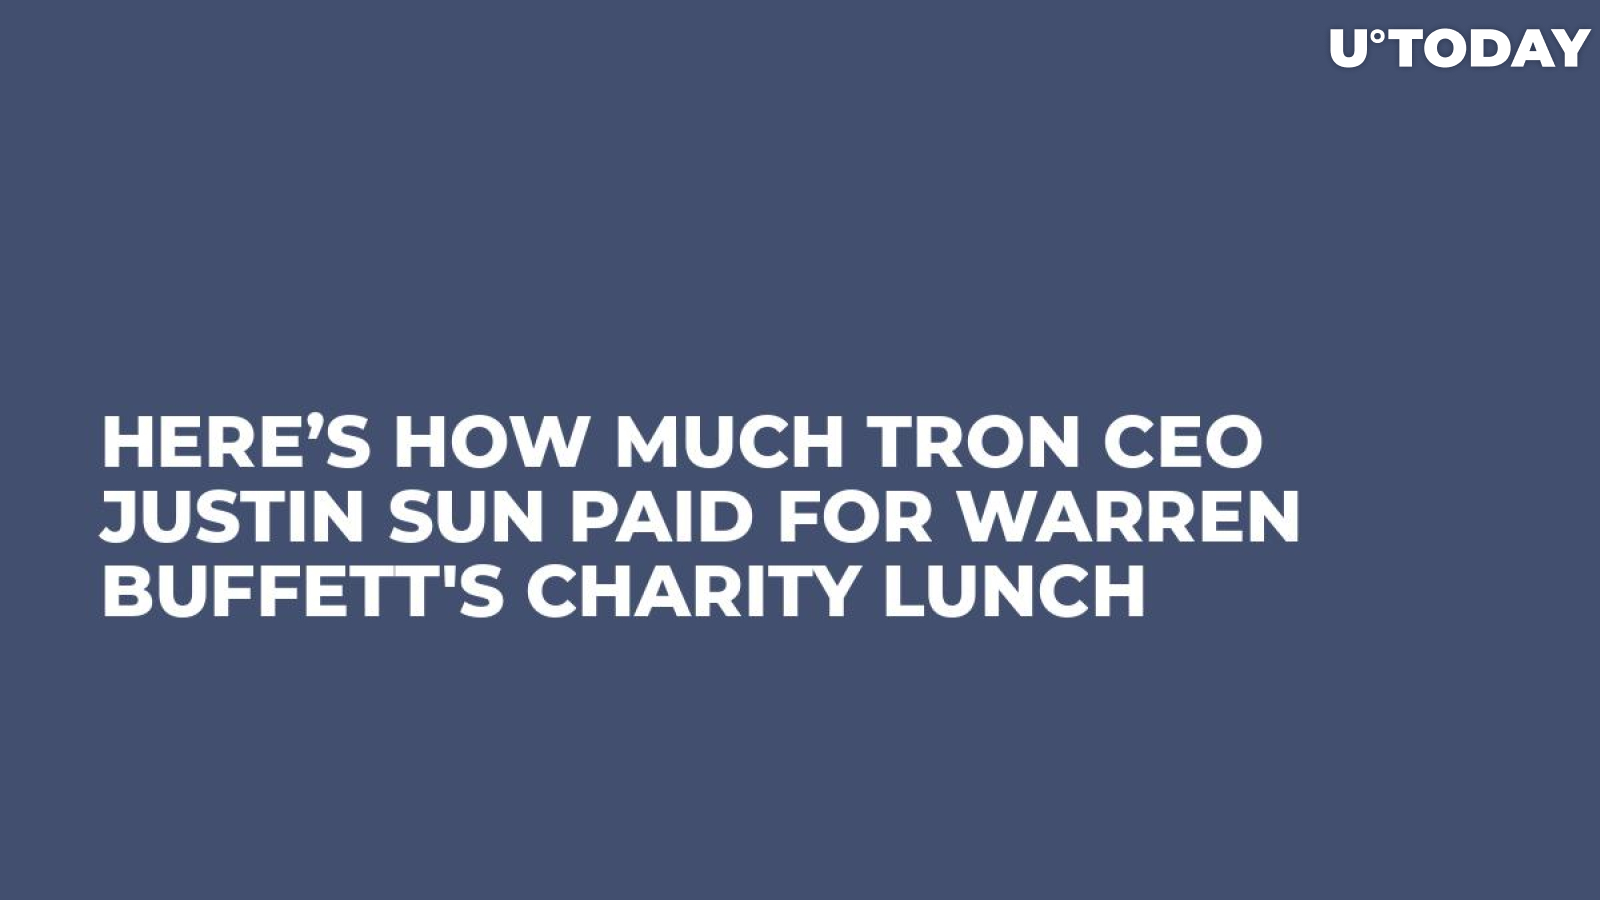 Here’s How Much Tron CEO Justin Sun Paid for Warren Buffett's Charity Lunch